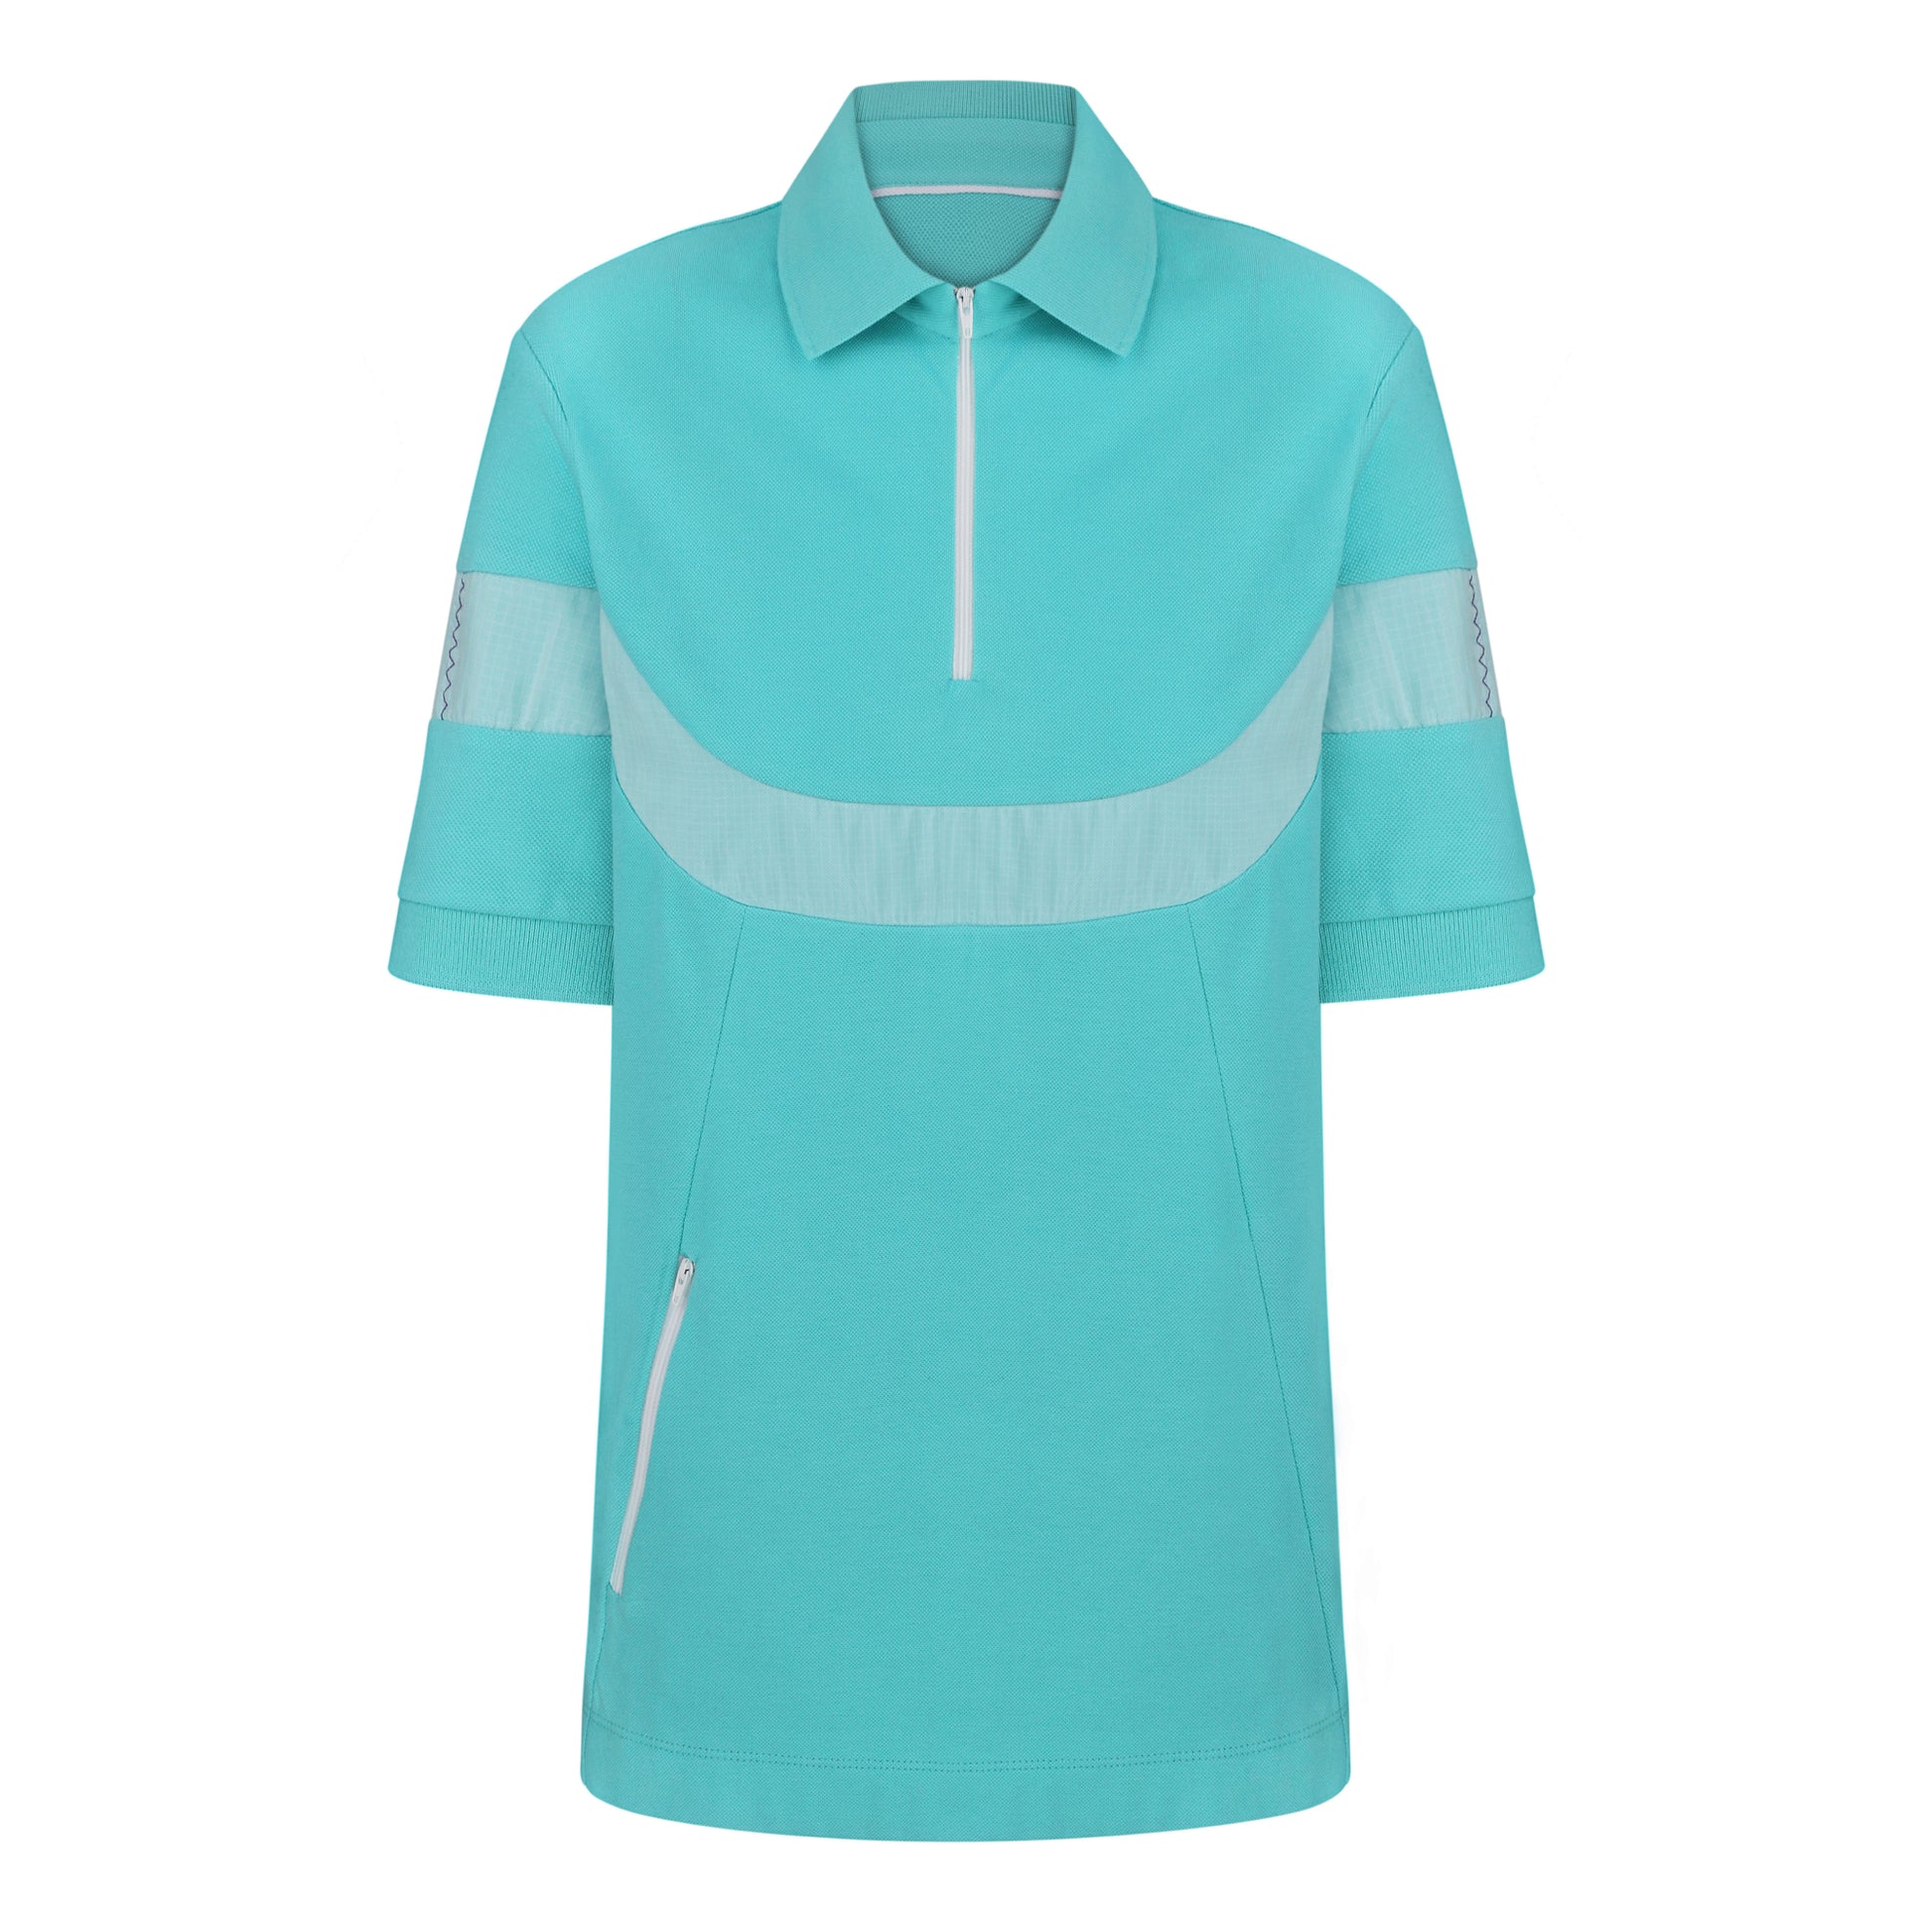 Green/Blue Polo with short sleeves & pockets. Made in Ukraine